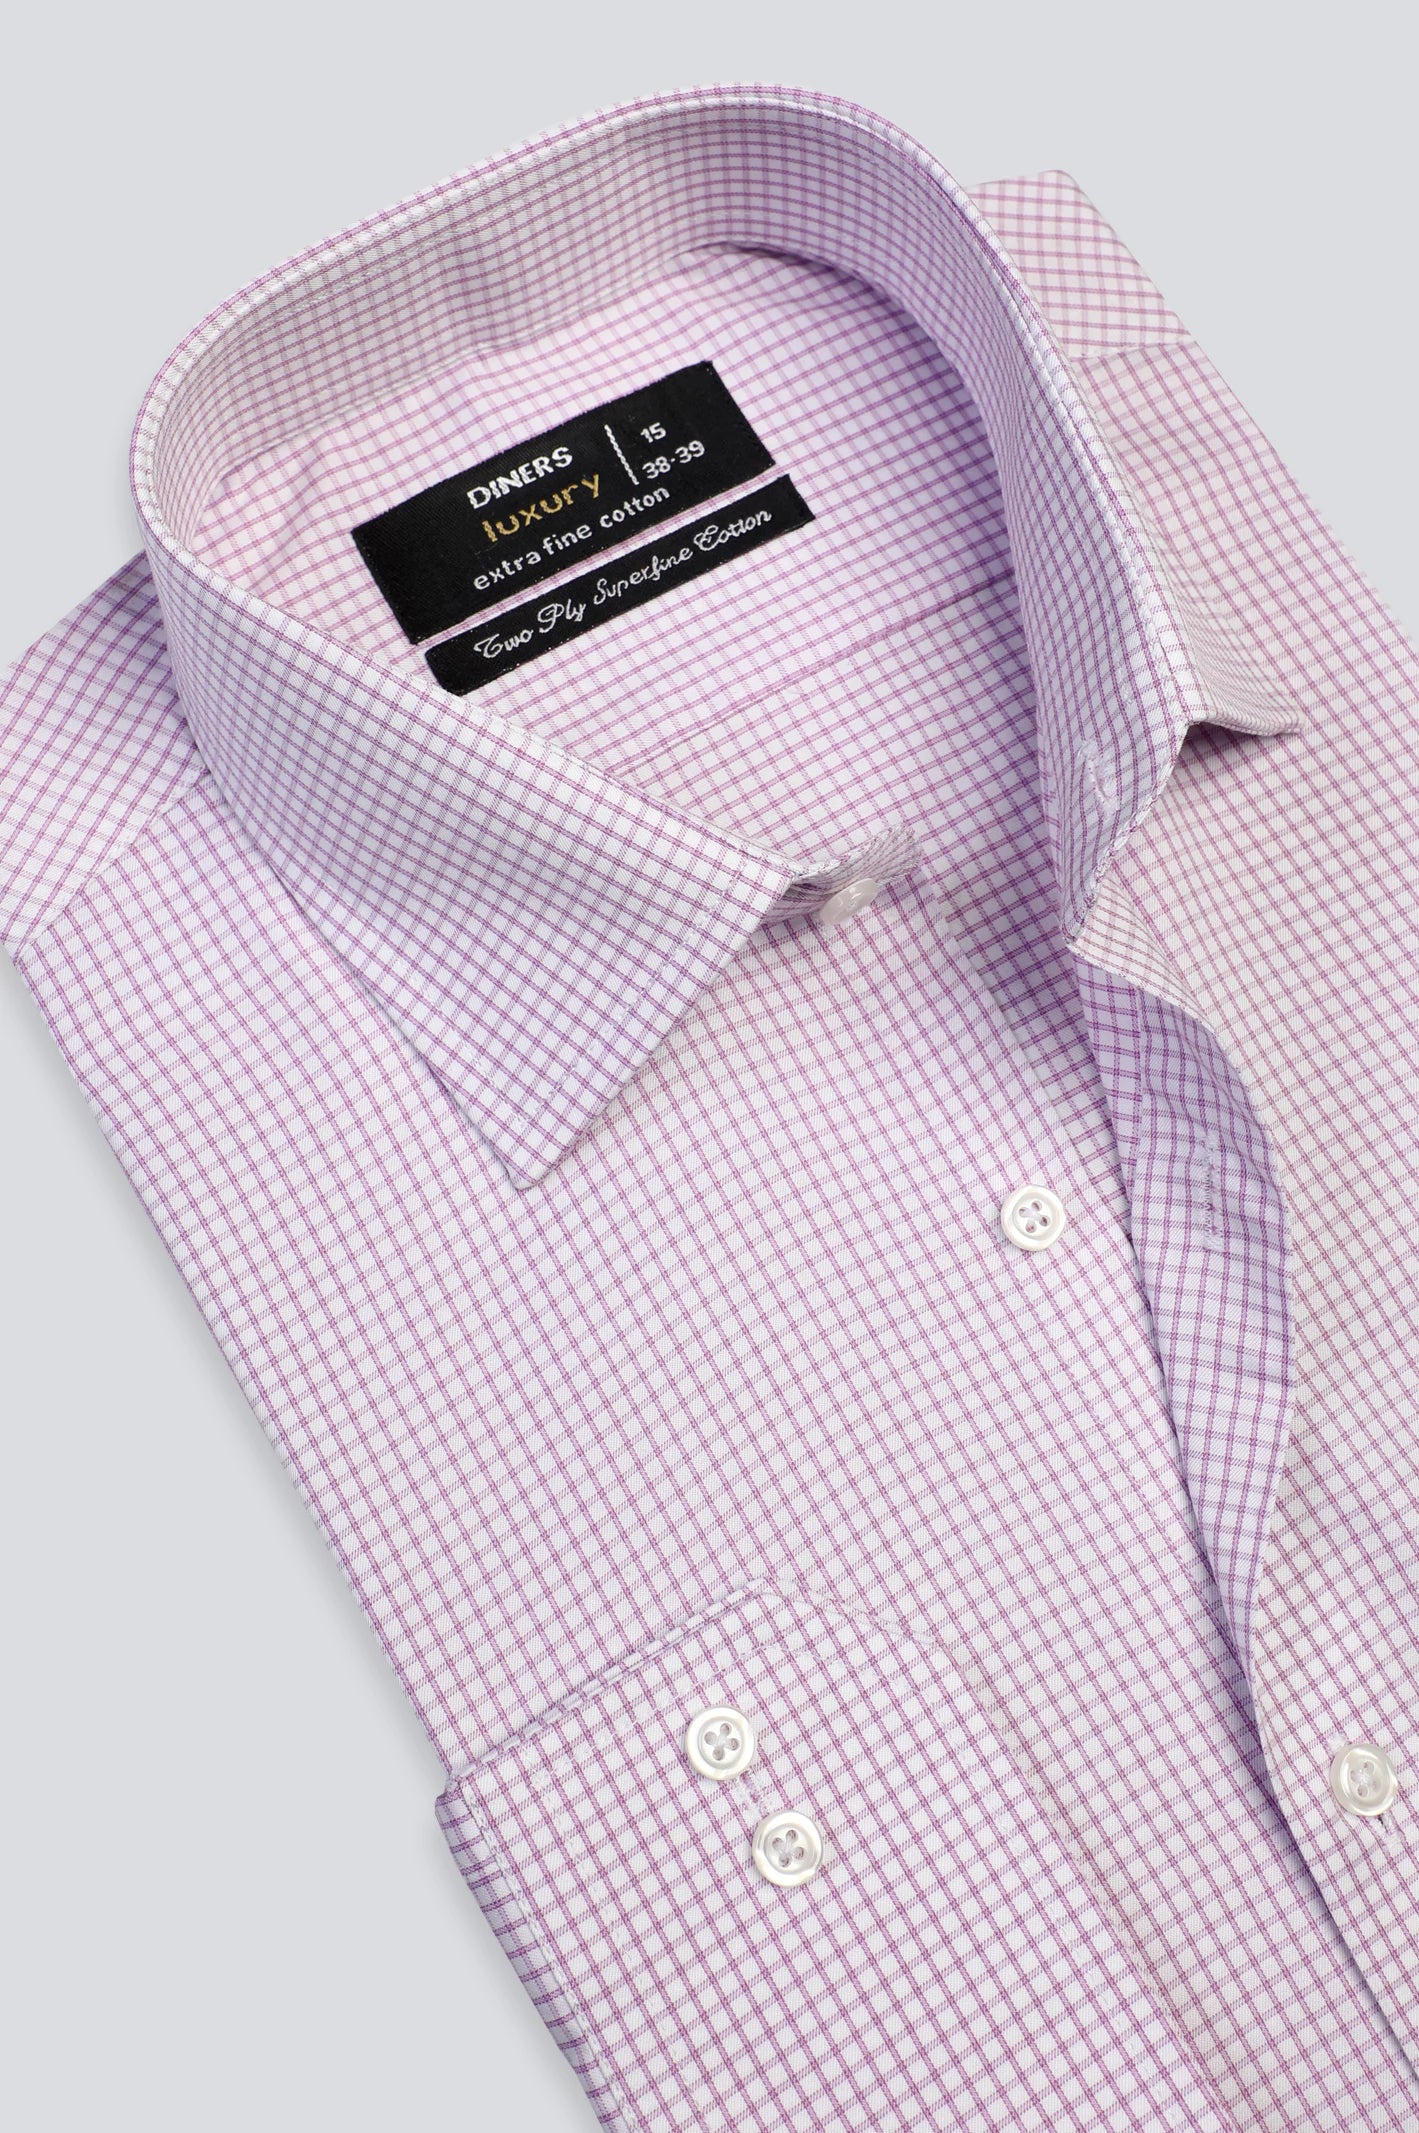 Diners Formal Purple Graph Shirts 